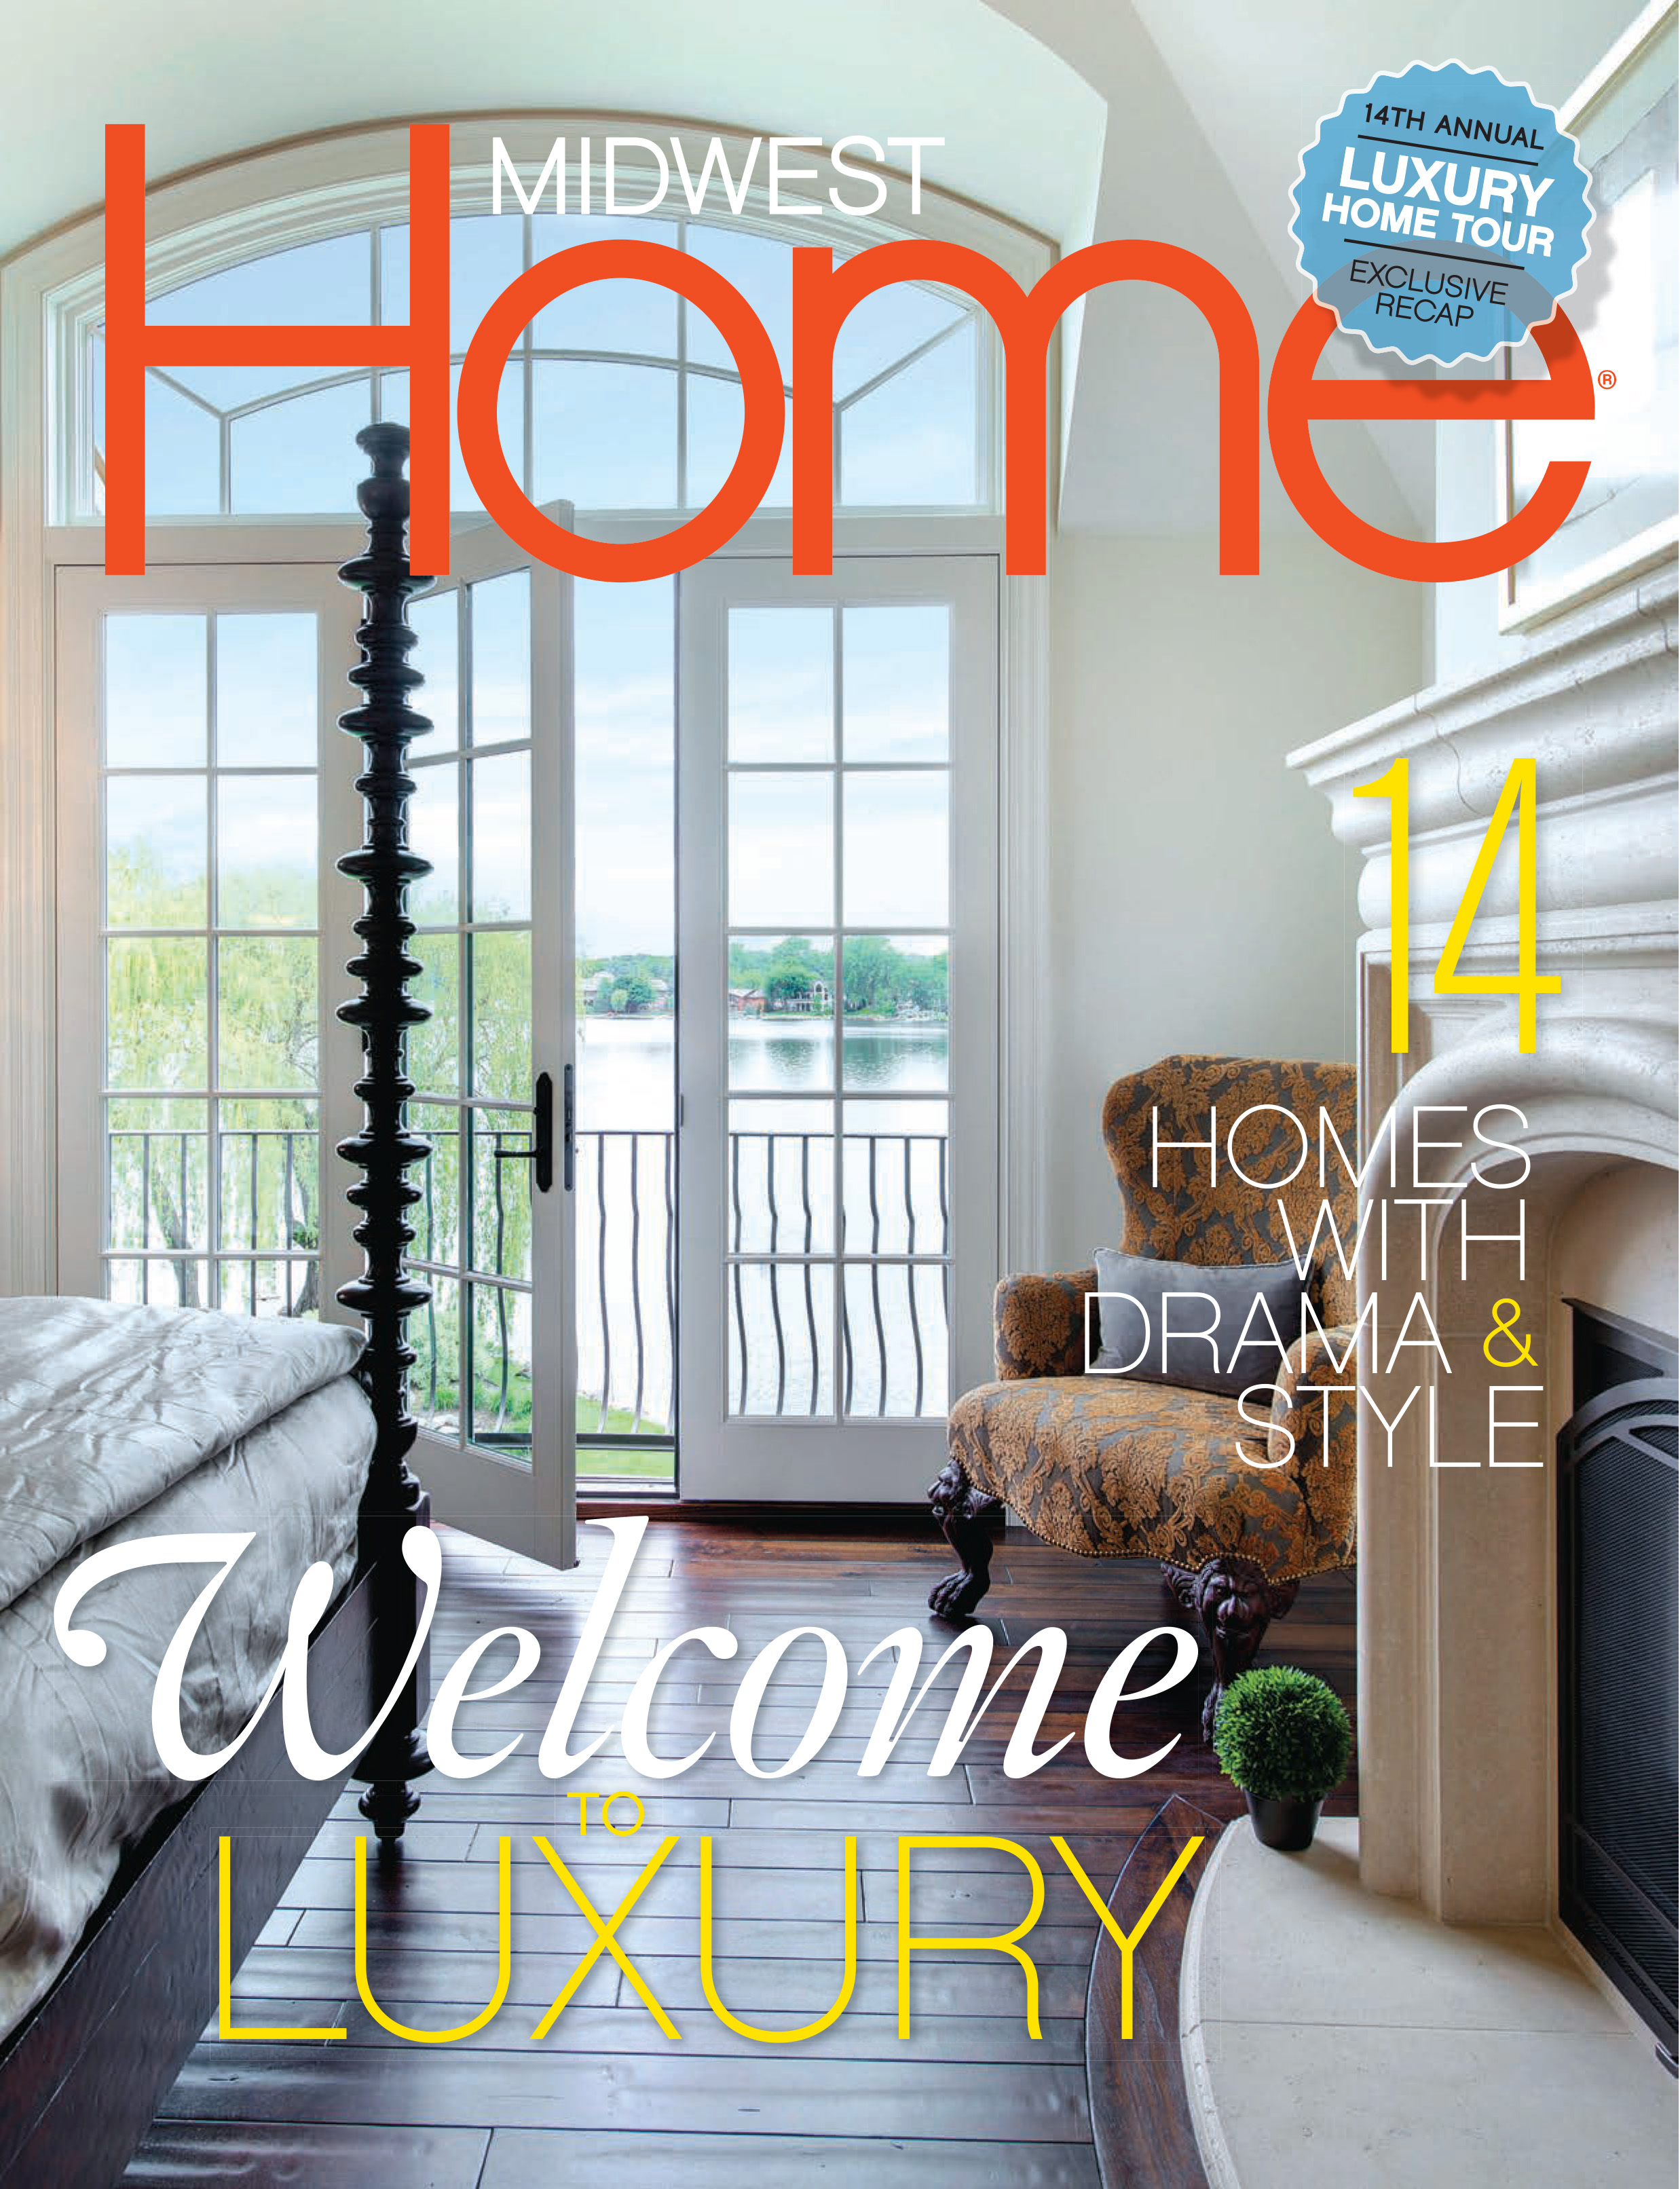 Midwest Home August 2014